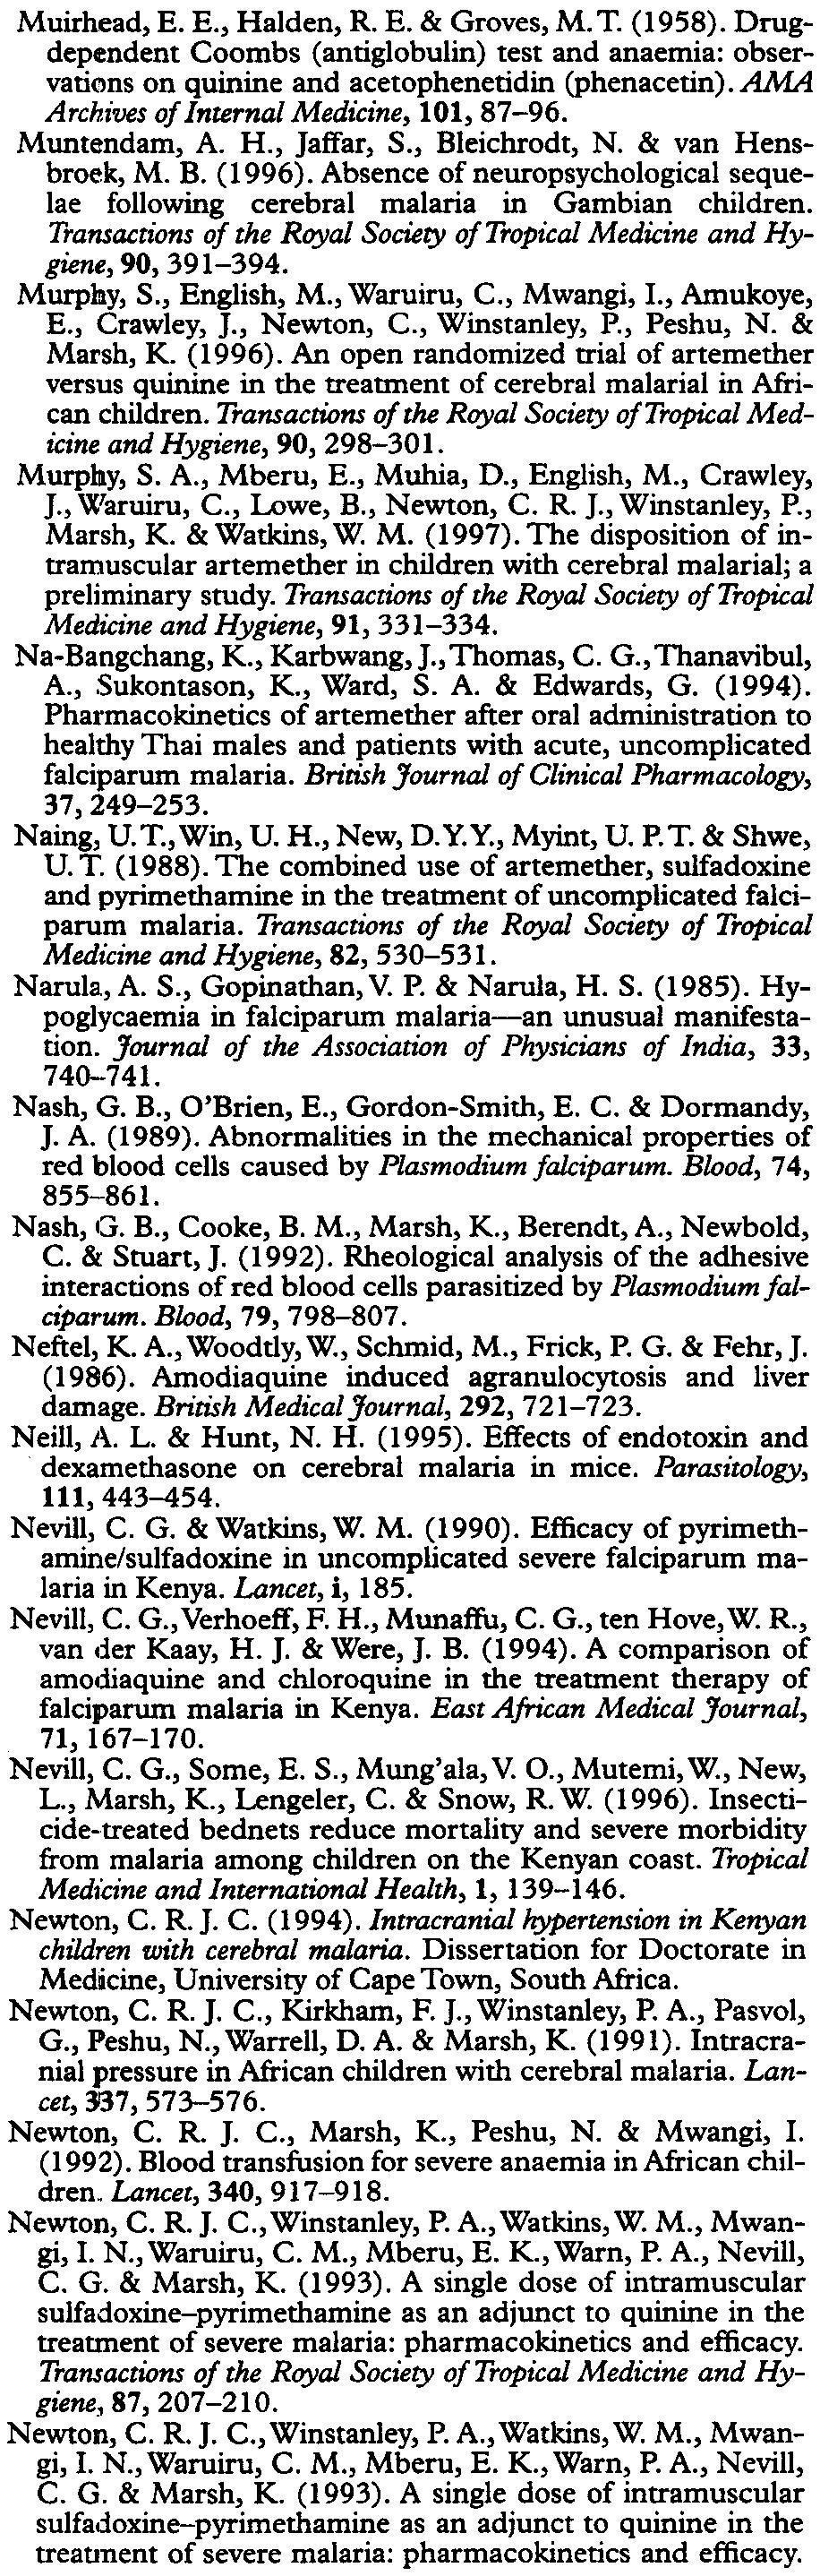 TRANSACnONS OFTHE ROYAL SOCIETY OFTROPlCAL MEDICINE AND HYGIENE (2000) 94, SUPPLEMENT 1 SIIS3 Muirhead, E. E., Halden, R. E. & Groves, M. T. (1958).